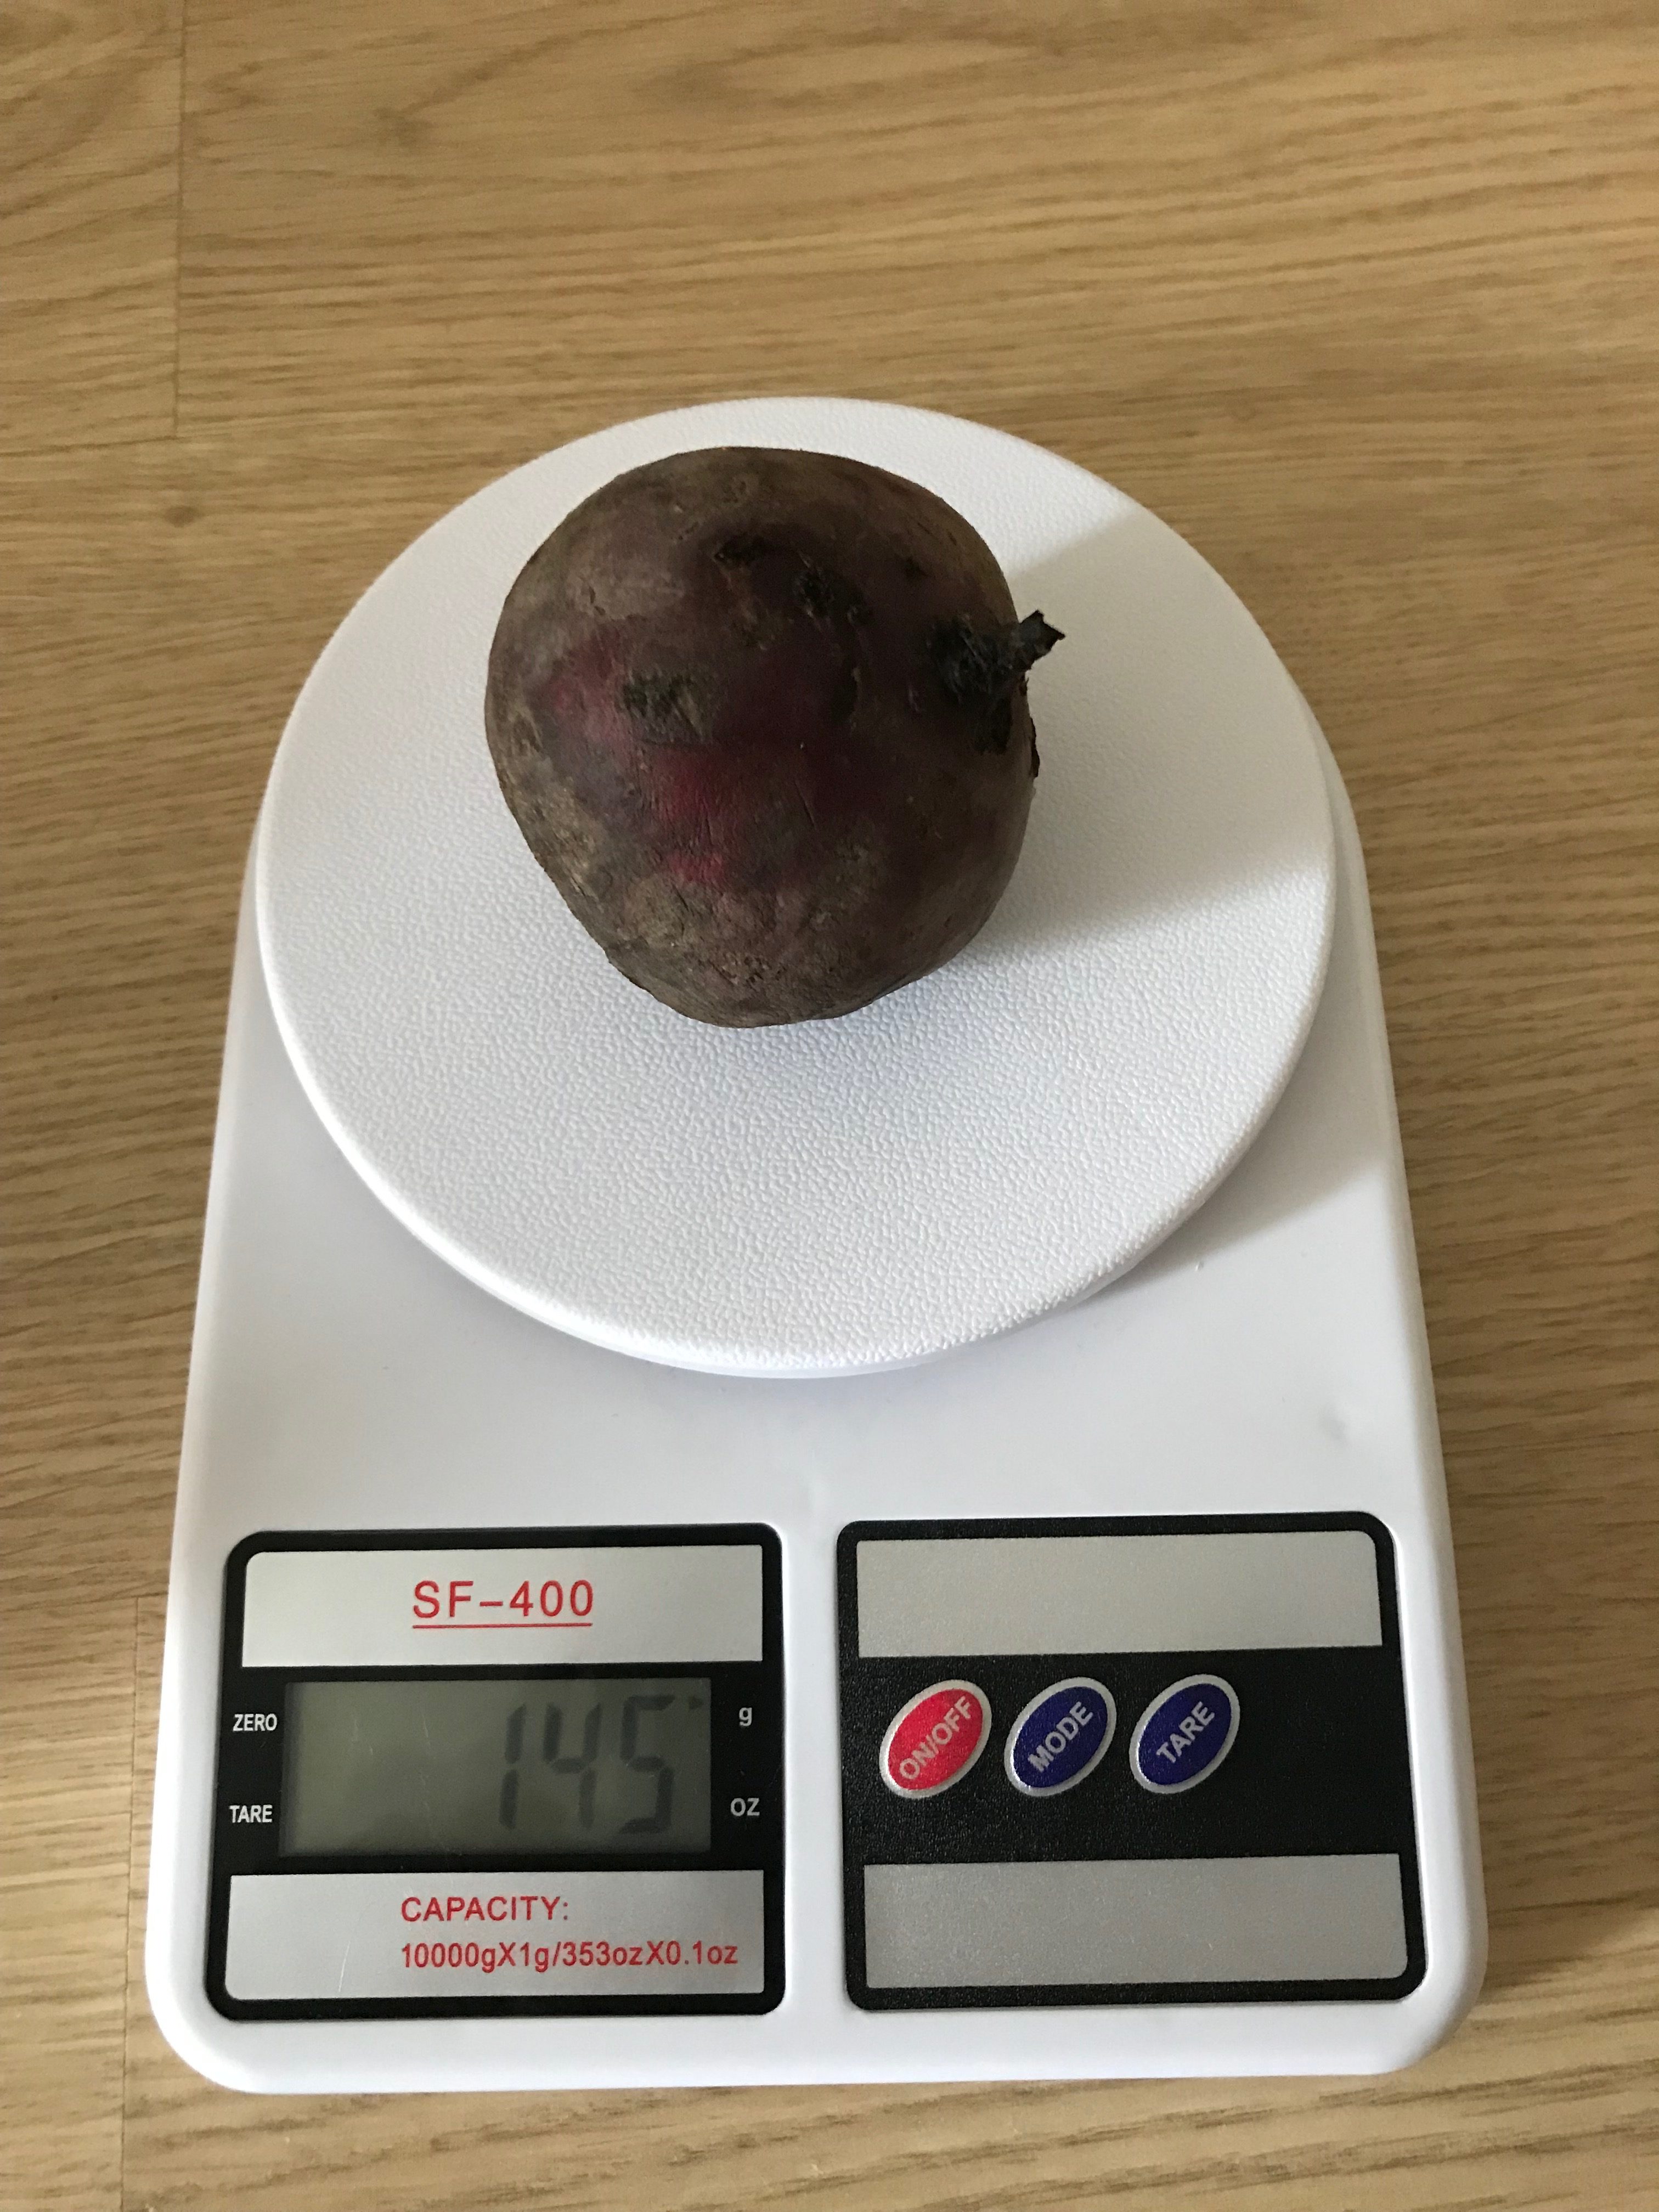 How much does a small beetroot weigh?